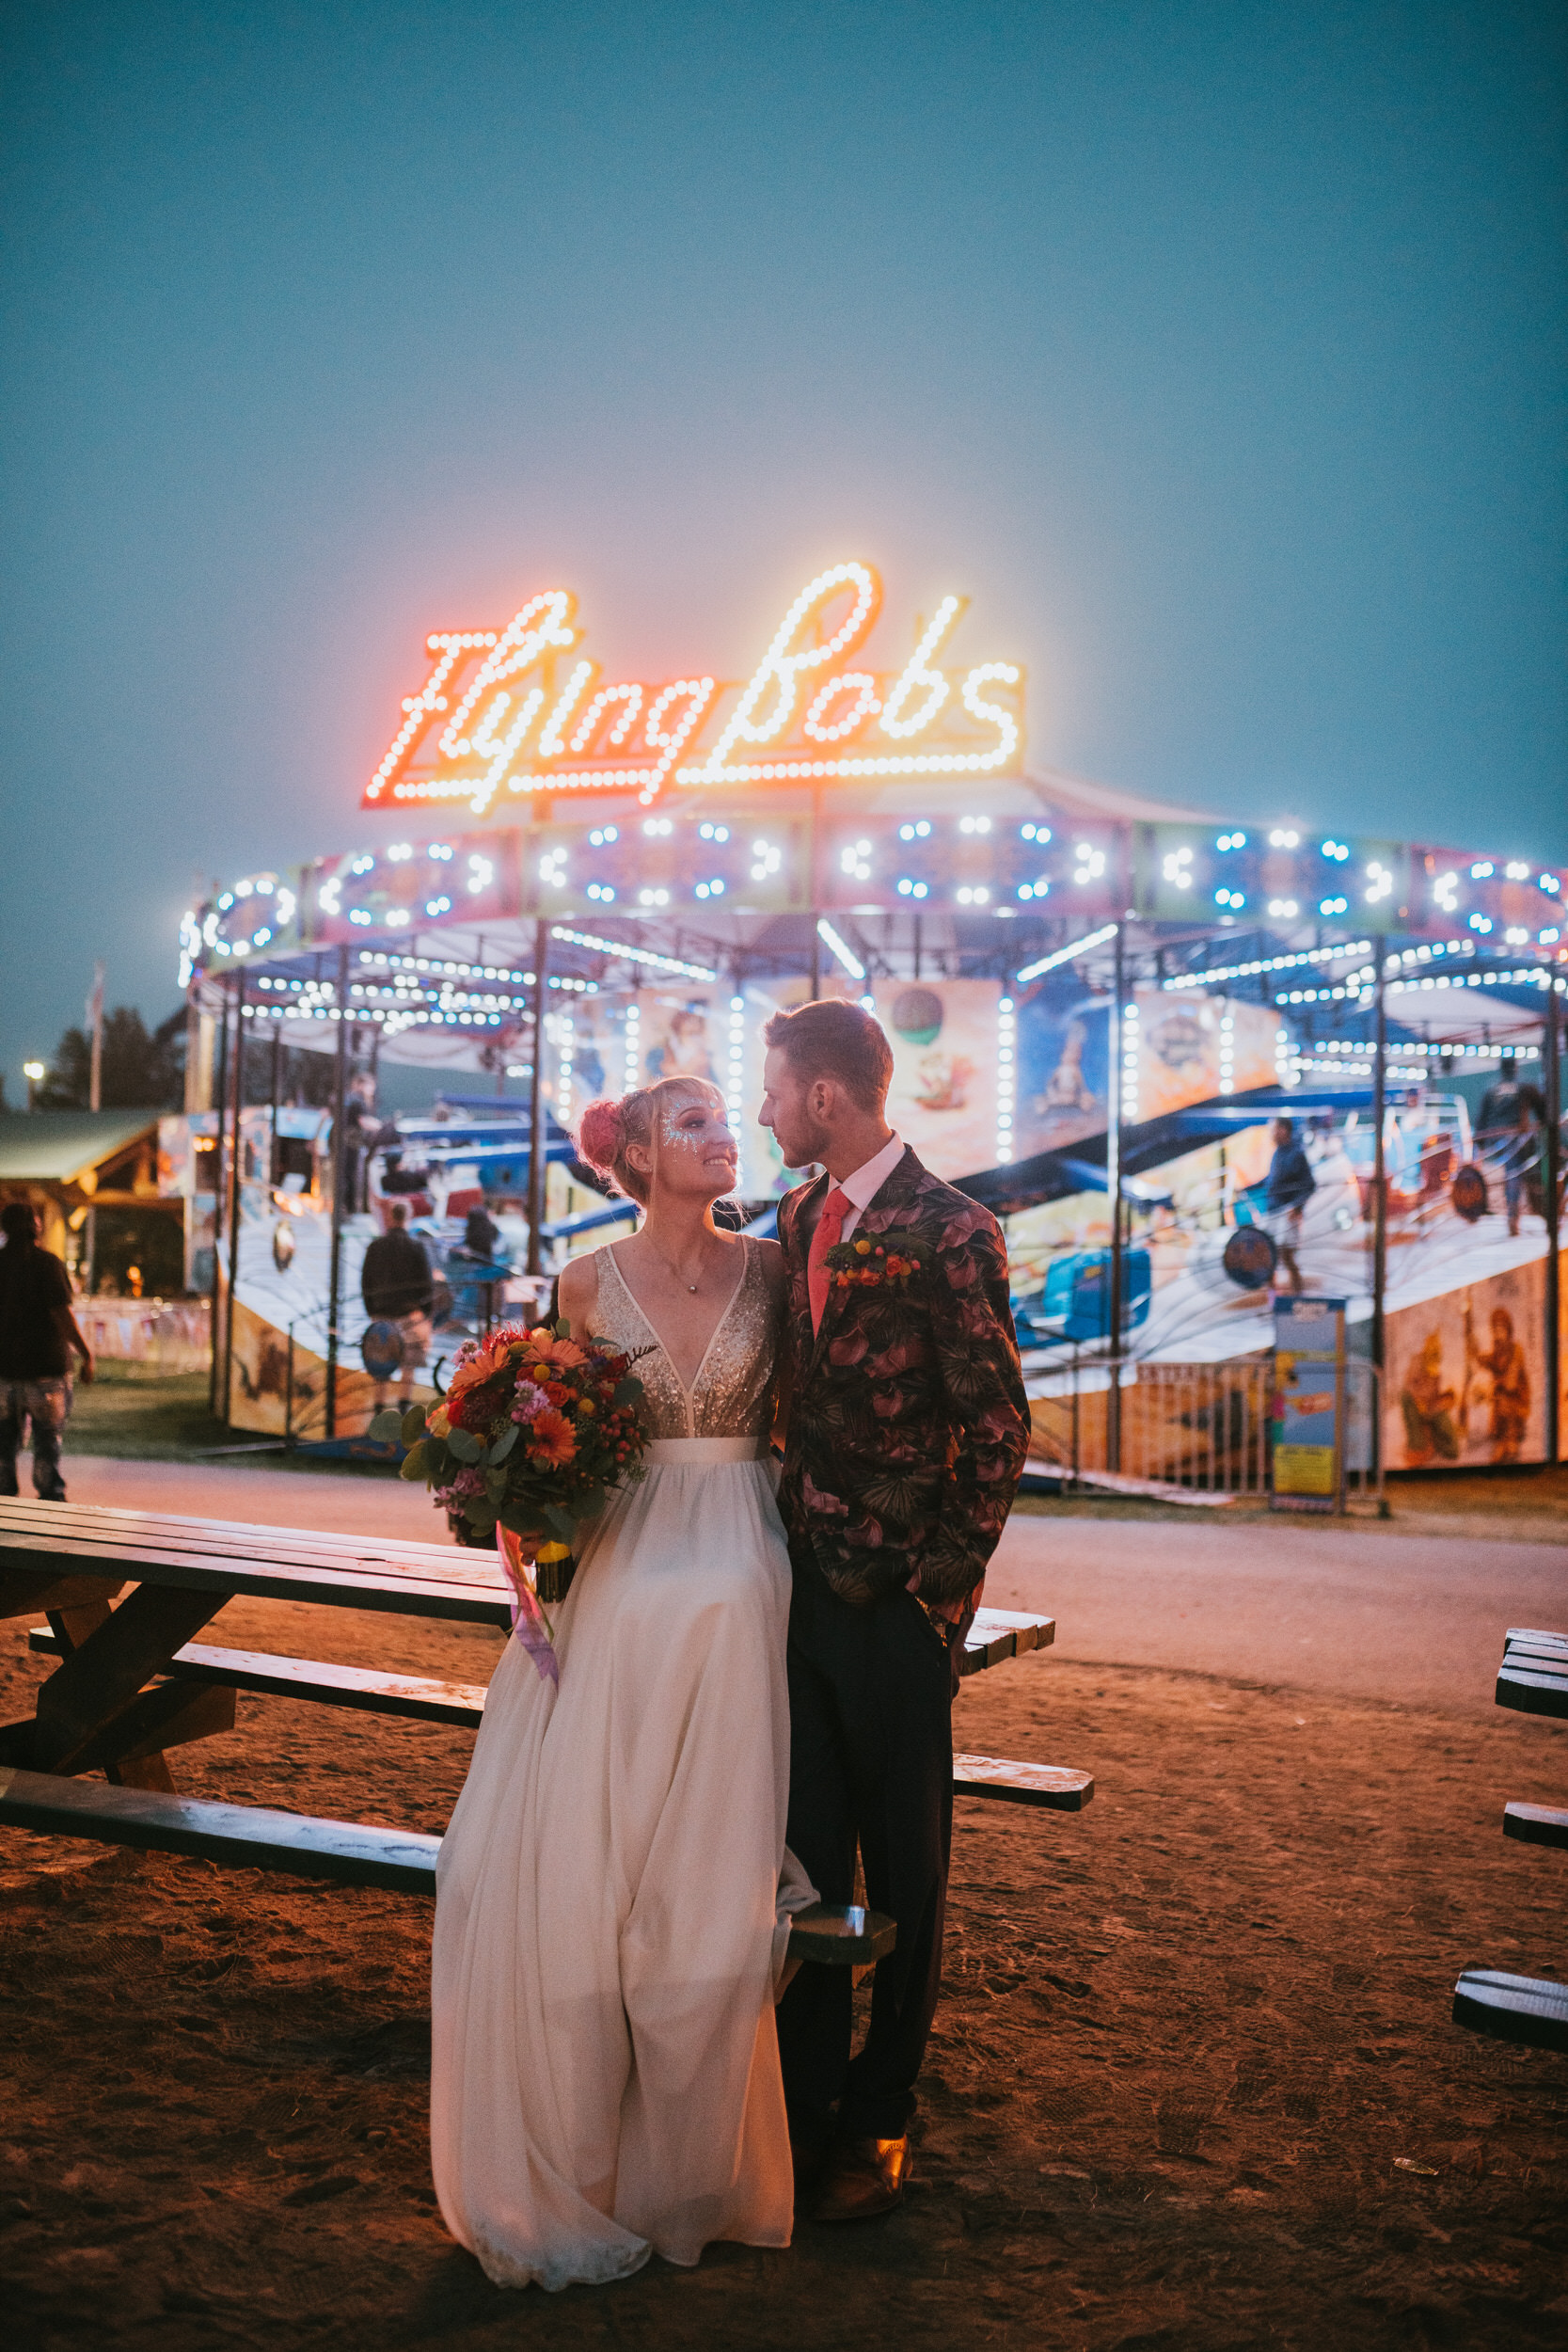 Colorful bride and groom in front of flying bobs neon signs at the alaska state fair